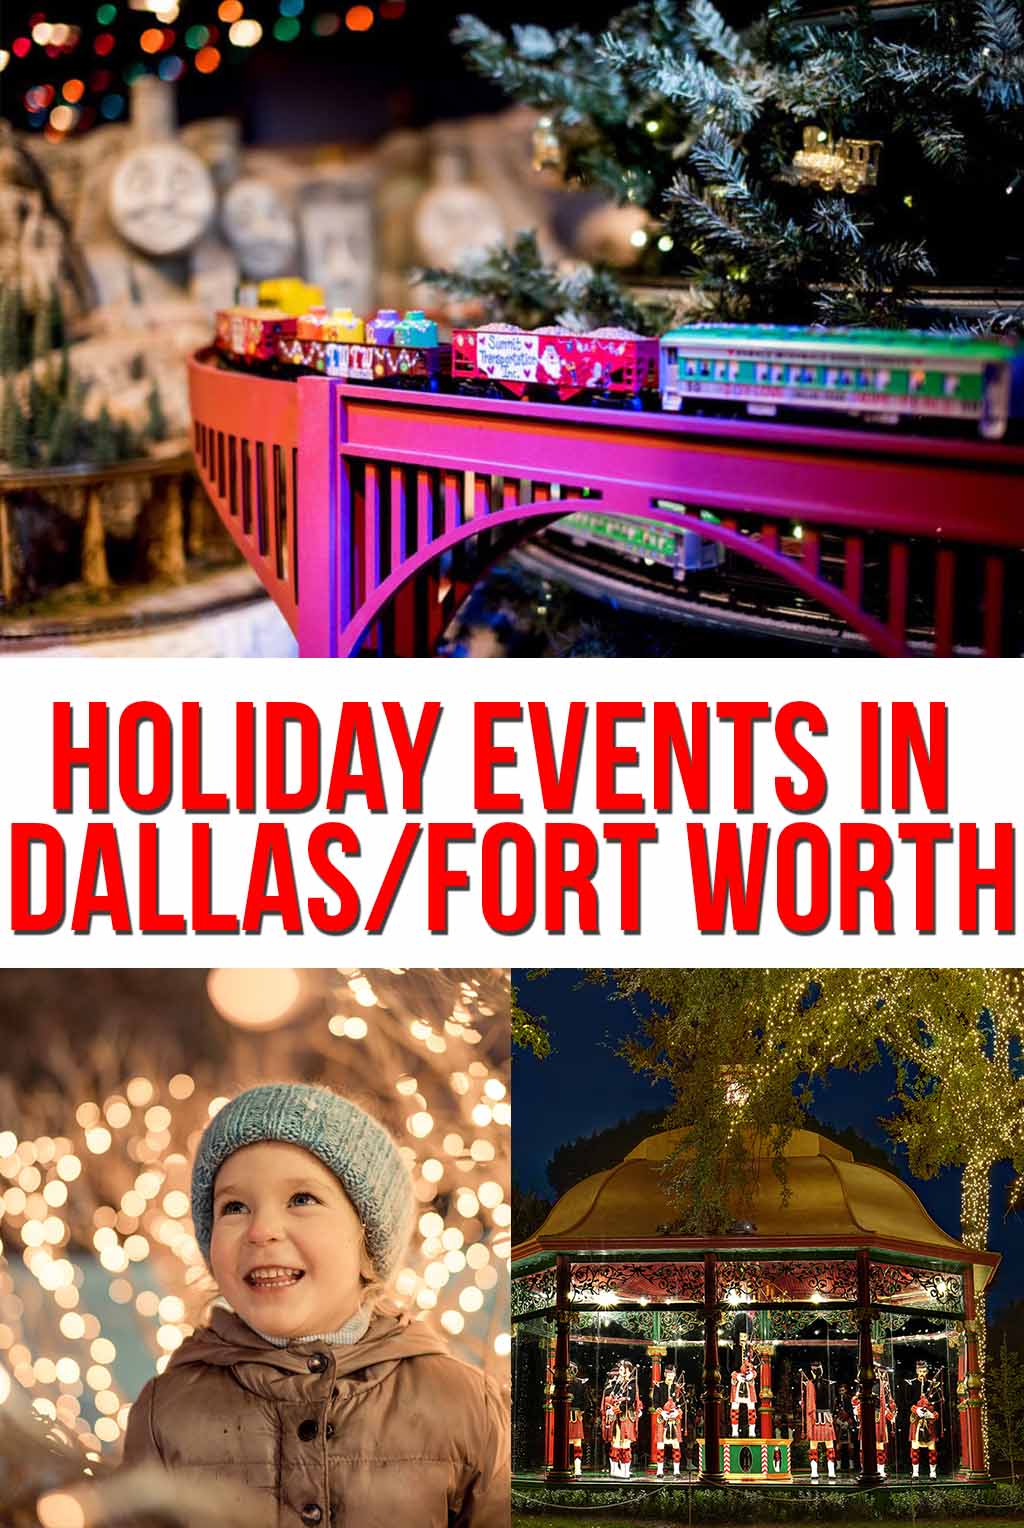 Holiday Events in Dallas/Fort Worth